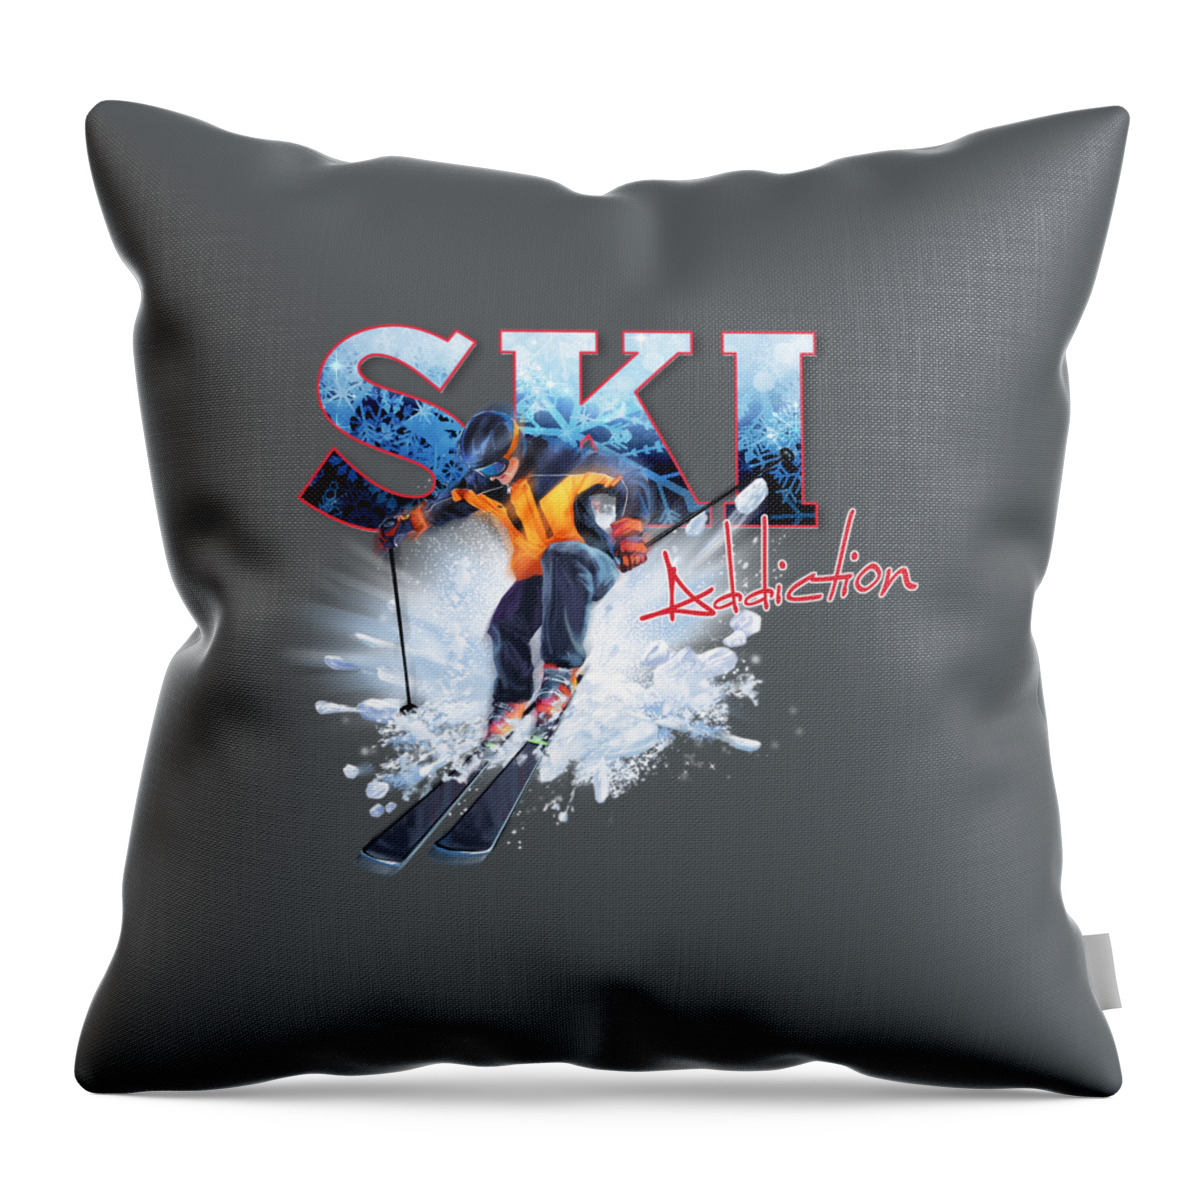 Ski Throw Pillow featuring the painting Ski Addiction by Robert Corsetti